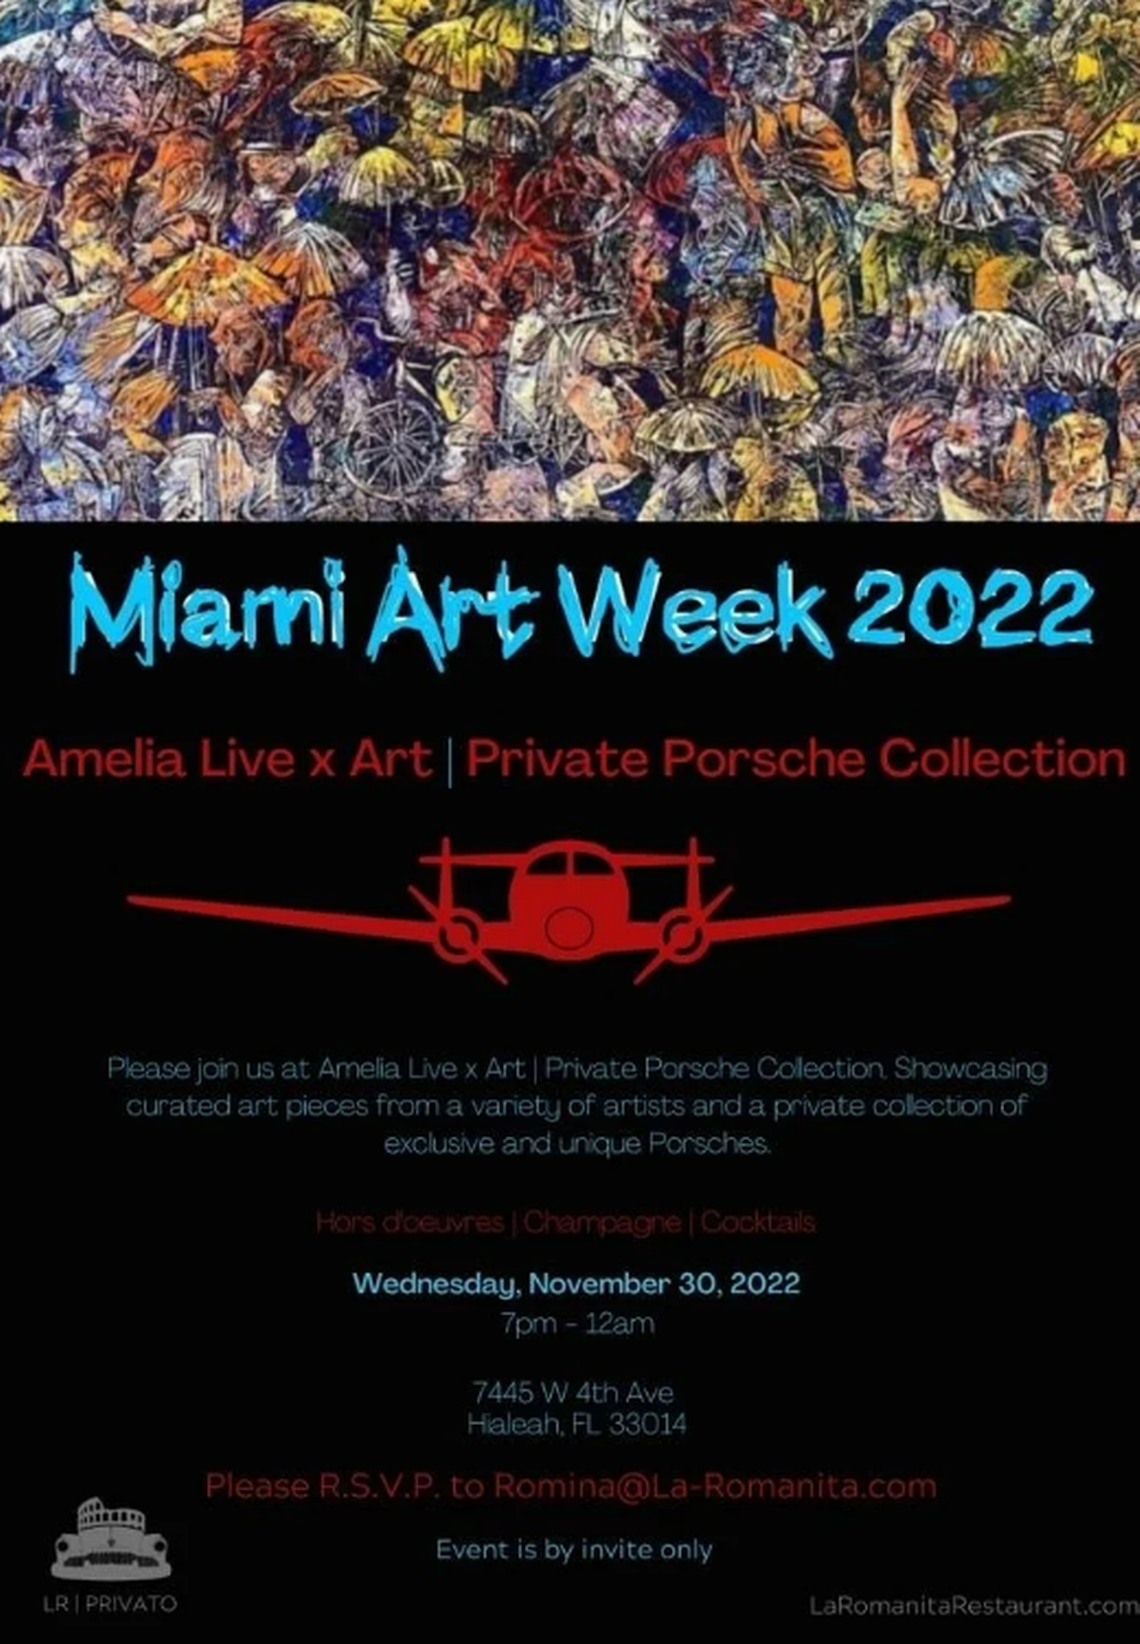 Flyer for the first exhibition of Amelia Live x Art, a Private Porsche Showcase Collection that will feature curated artwork from a variety of artists and a private collection of Porsches